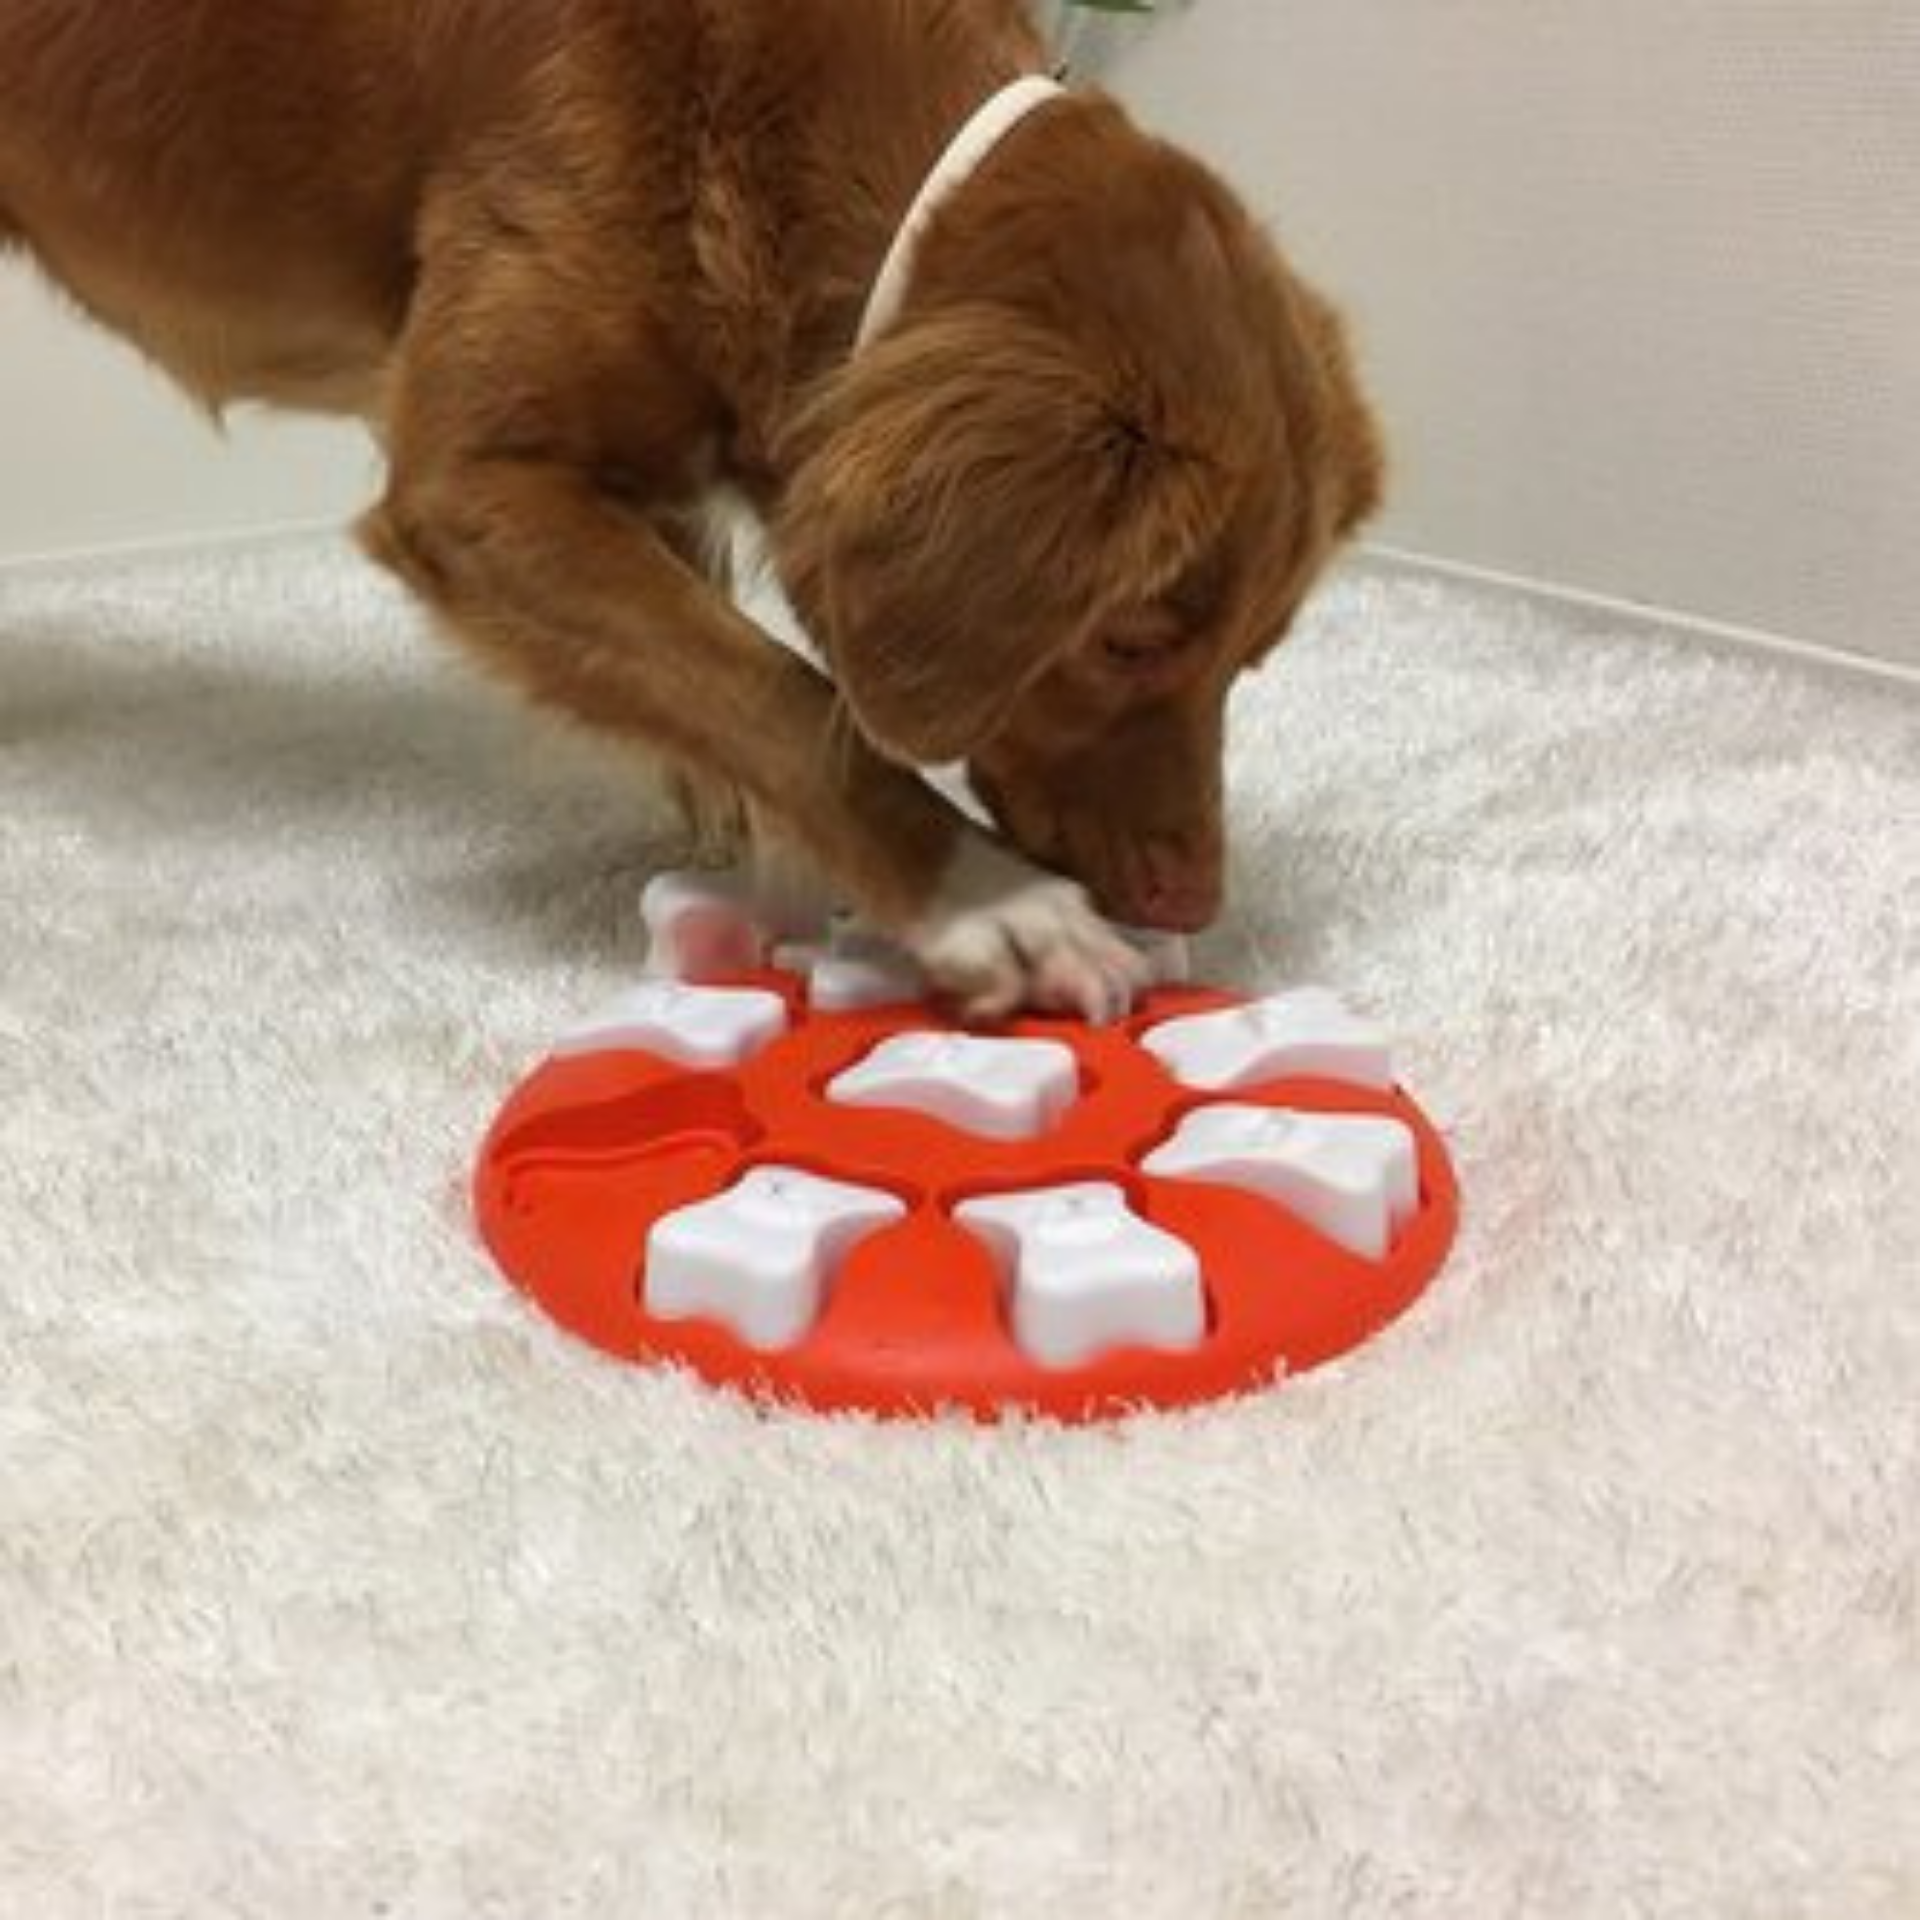 interactive dog toy for your fur babies Let's Pawty Sydney